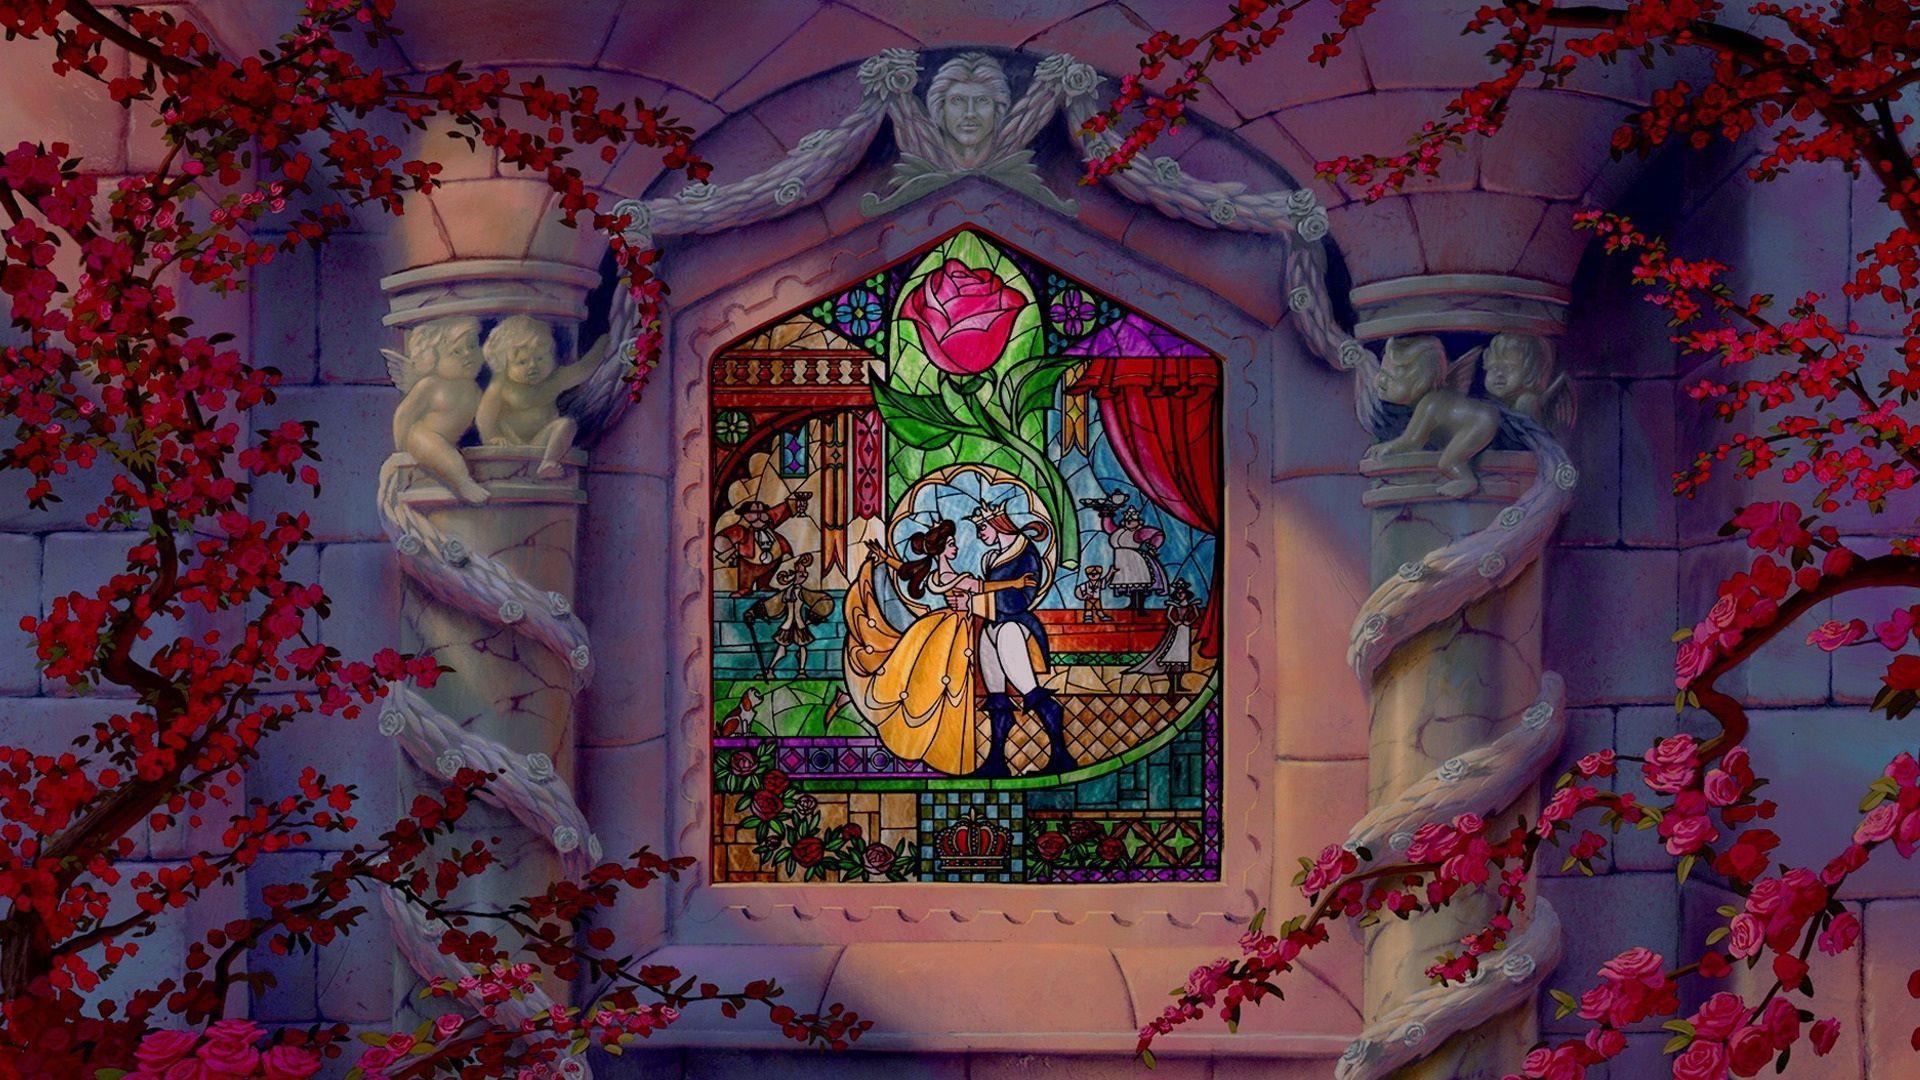 Trends For > Disneys Beauty And The Beast Wallpaper